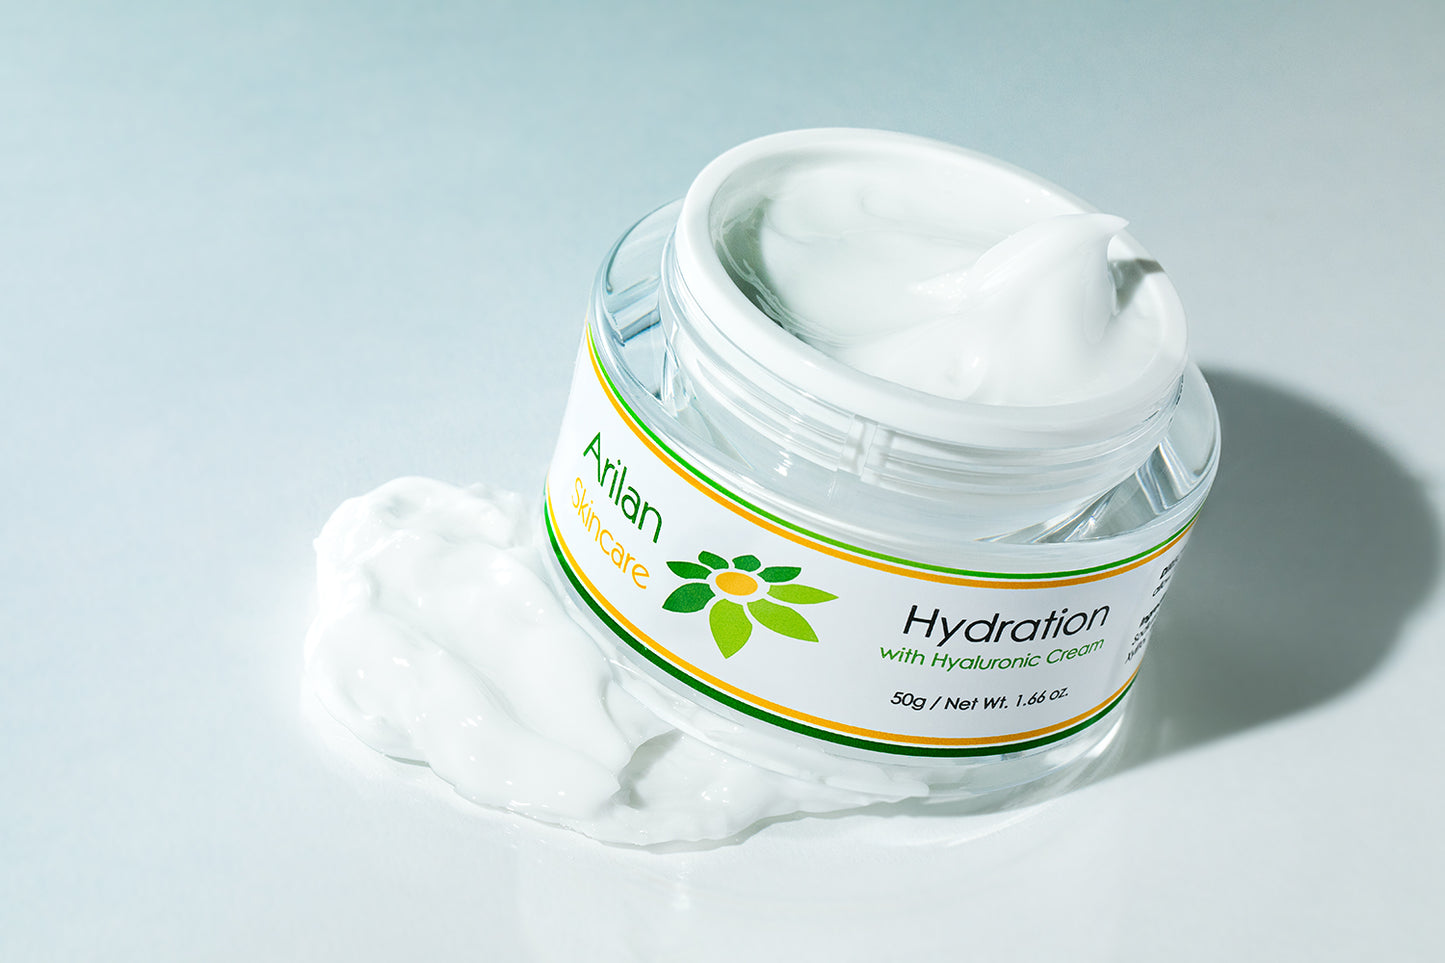 Hydration with Hyaluronic Cream